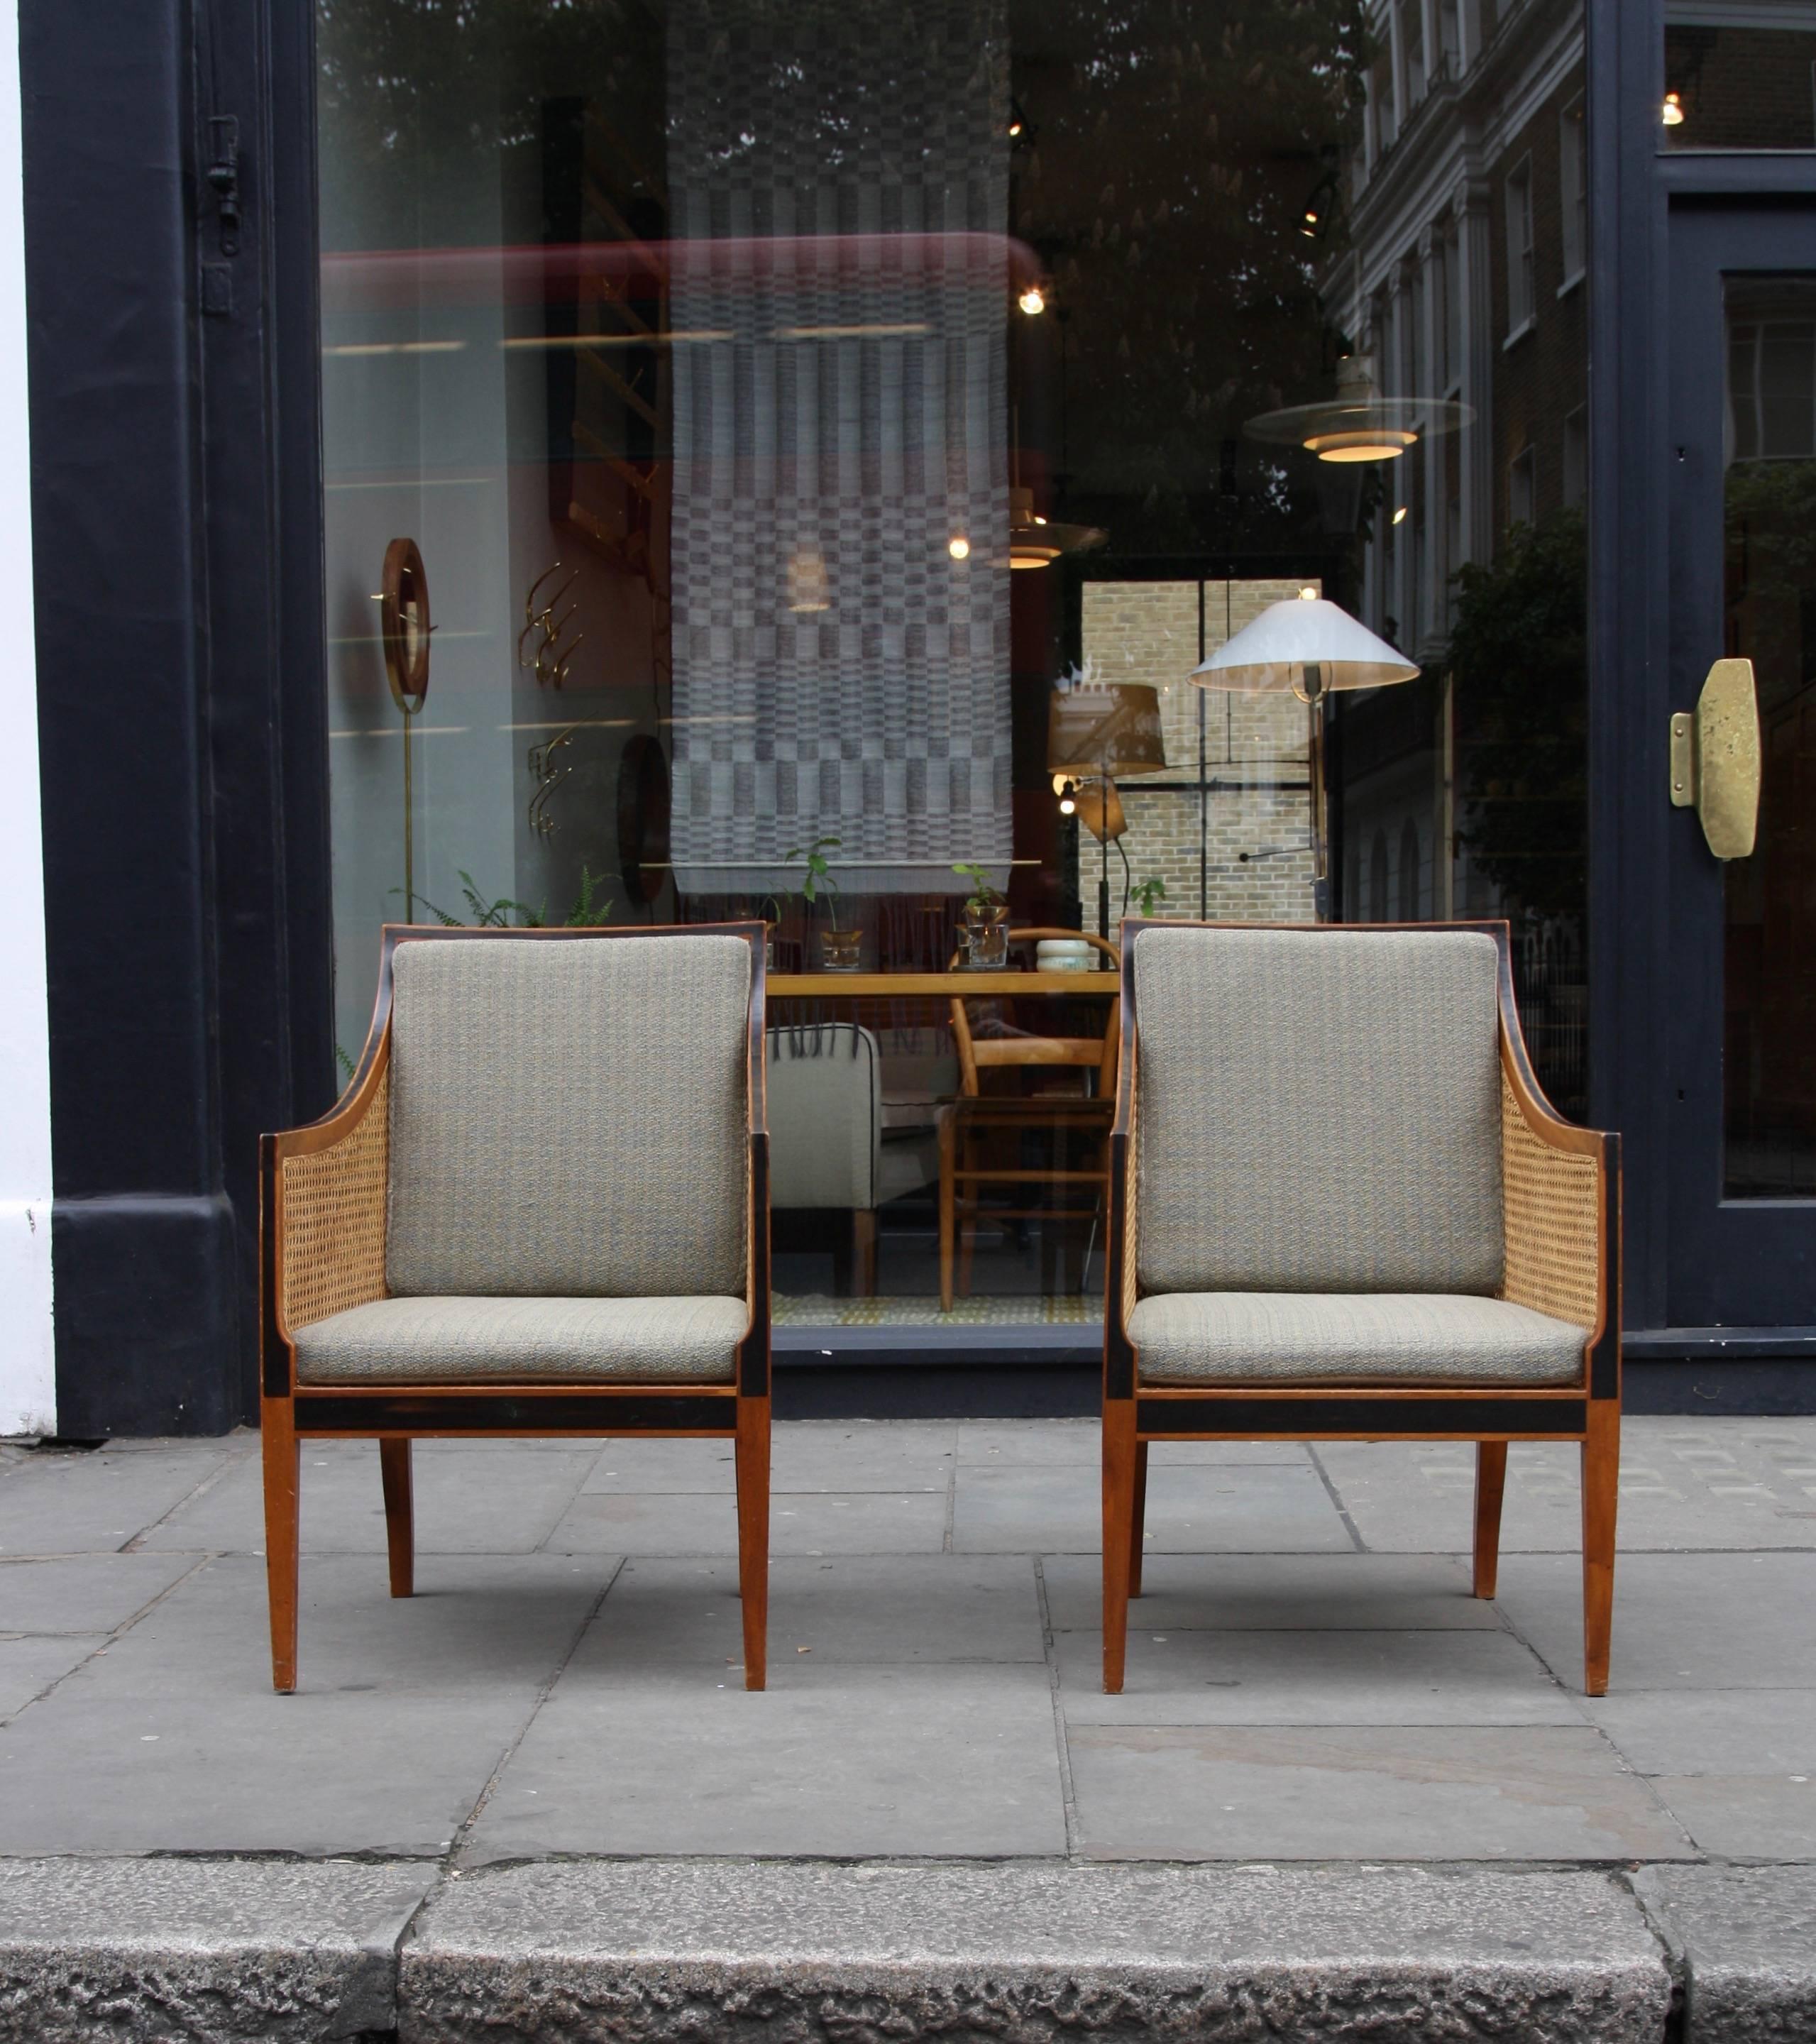 A pair of 'Bergere' or 'English Chairs' designed by Kaare Klint in 1932 and made by the cabinetmaker Rud Rasmussen, Copenhagen, in the early 1940s.

The chairs have solid mahogany frames with rosewood marquetry inlay and woven cane panels to each